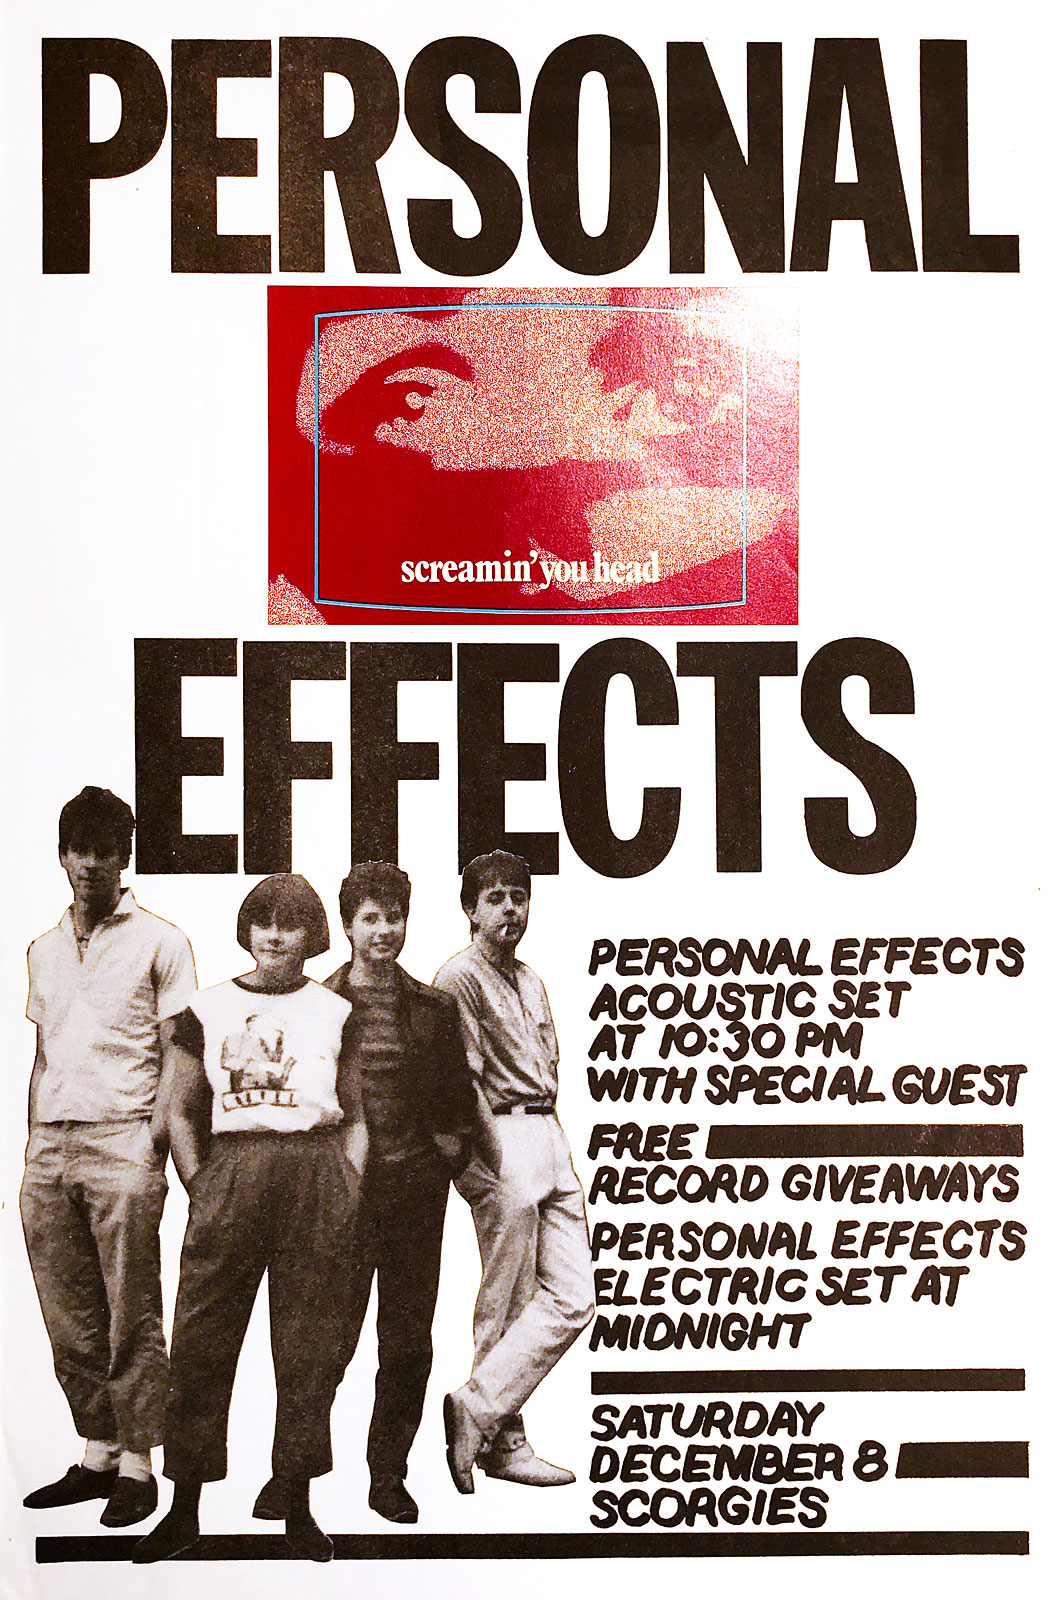 Poster for Personal Effects at Scorgie's in Rochester, New York on 12.08.1984. The band played a first set acoustically.